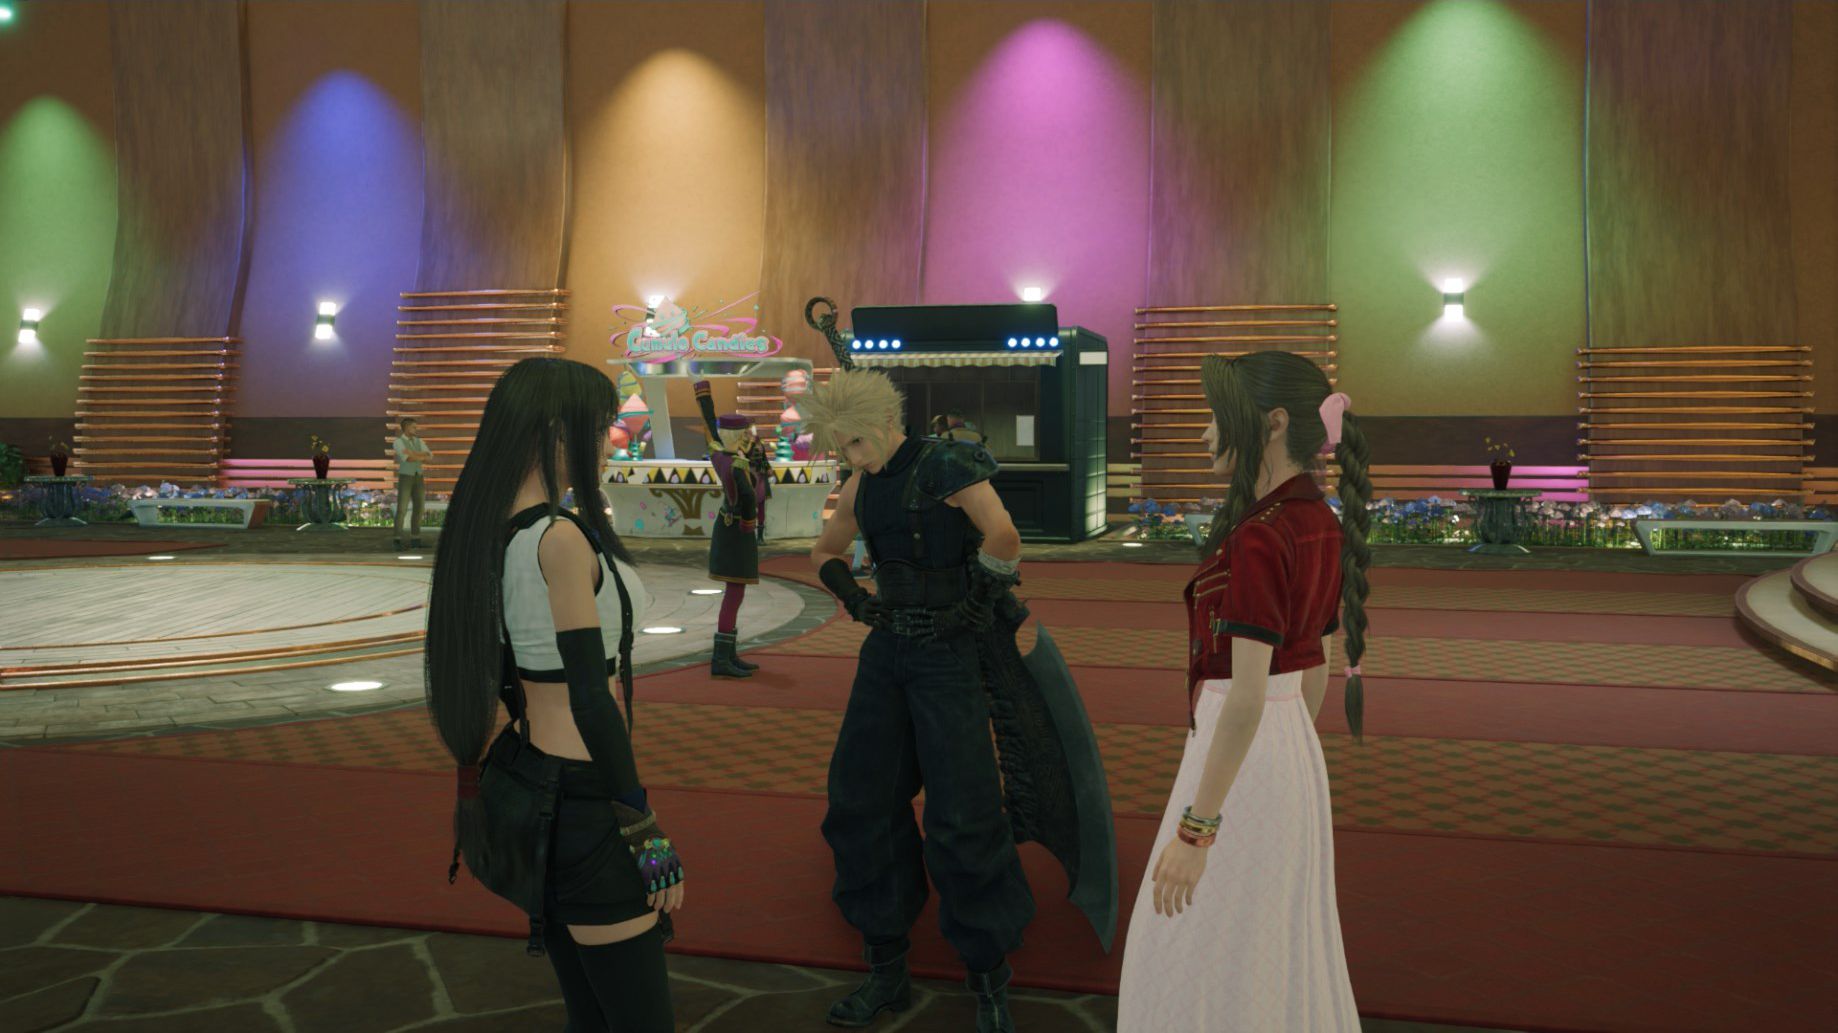 Cloud stands between Aerith and Tifa at the Gold Saucer in Final Fantasy 7 Rebirth